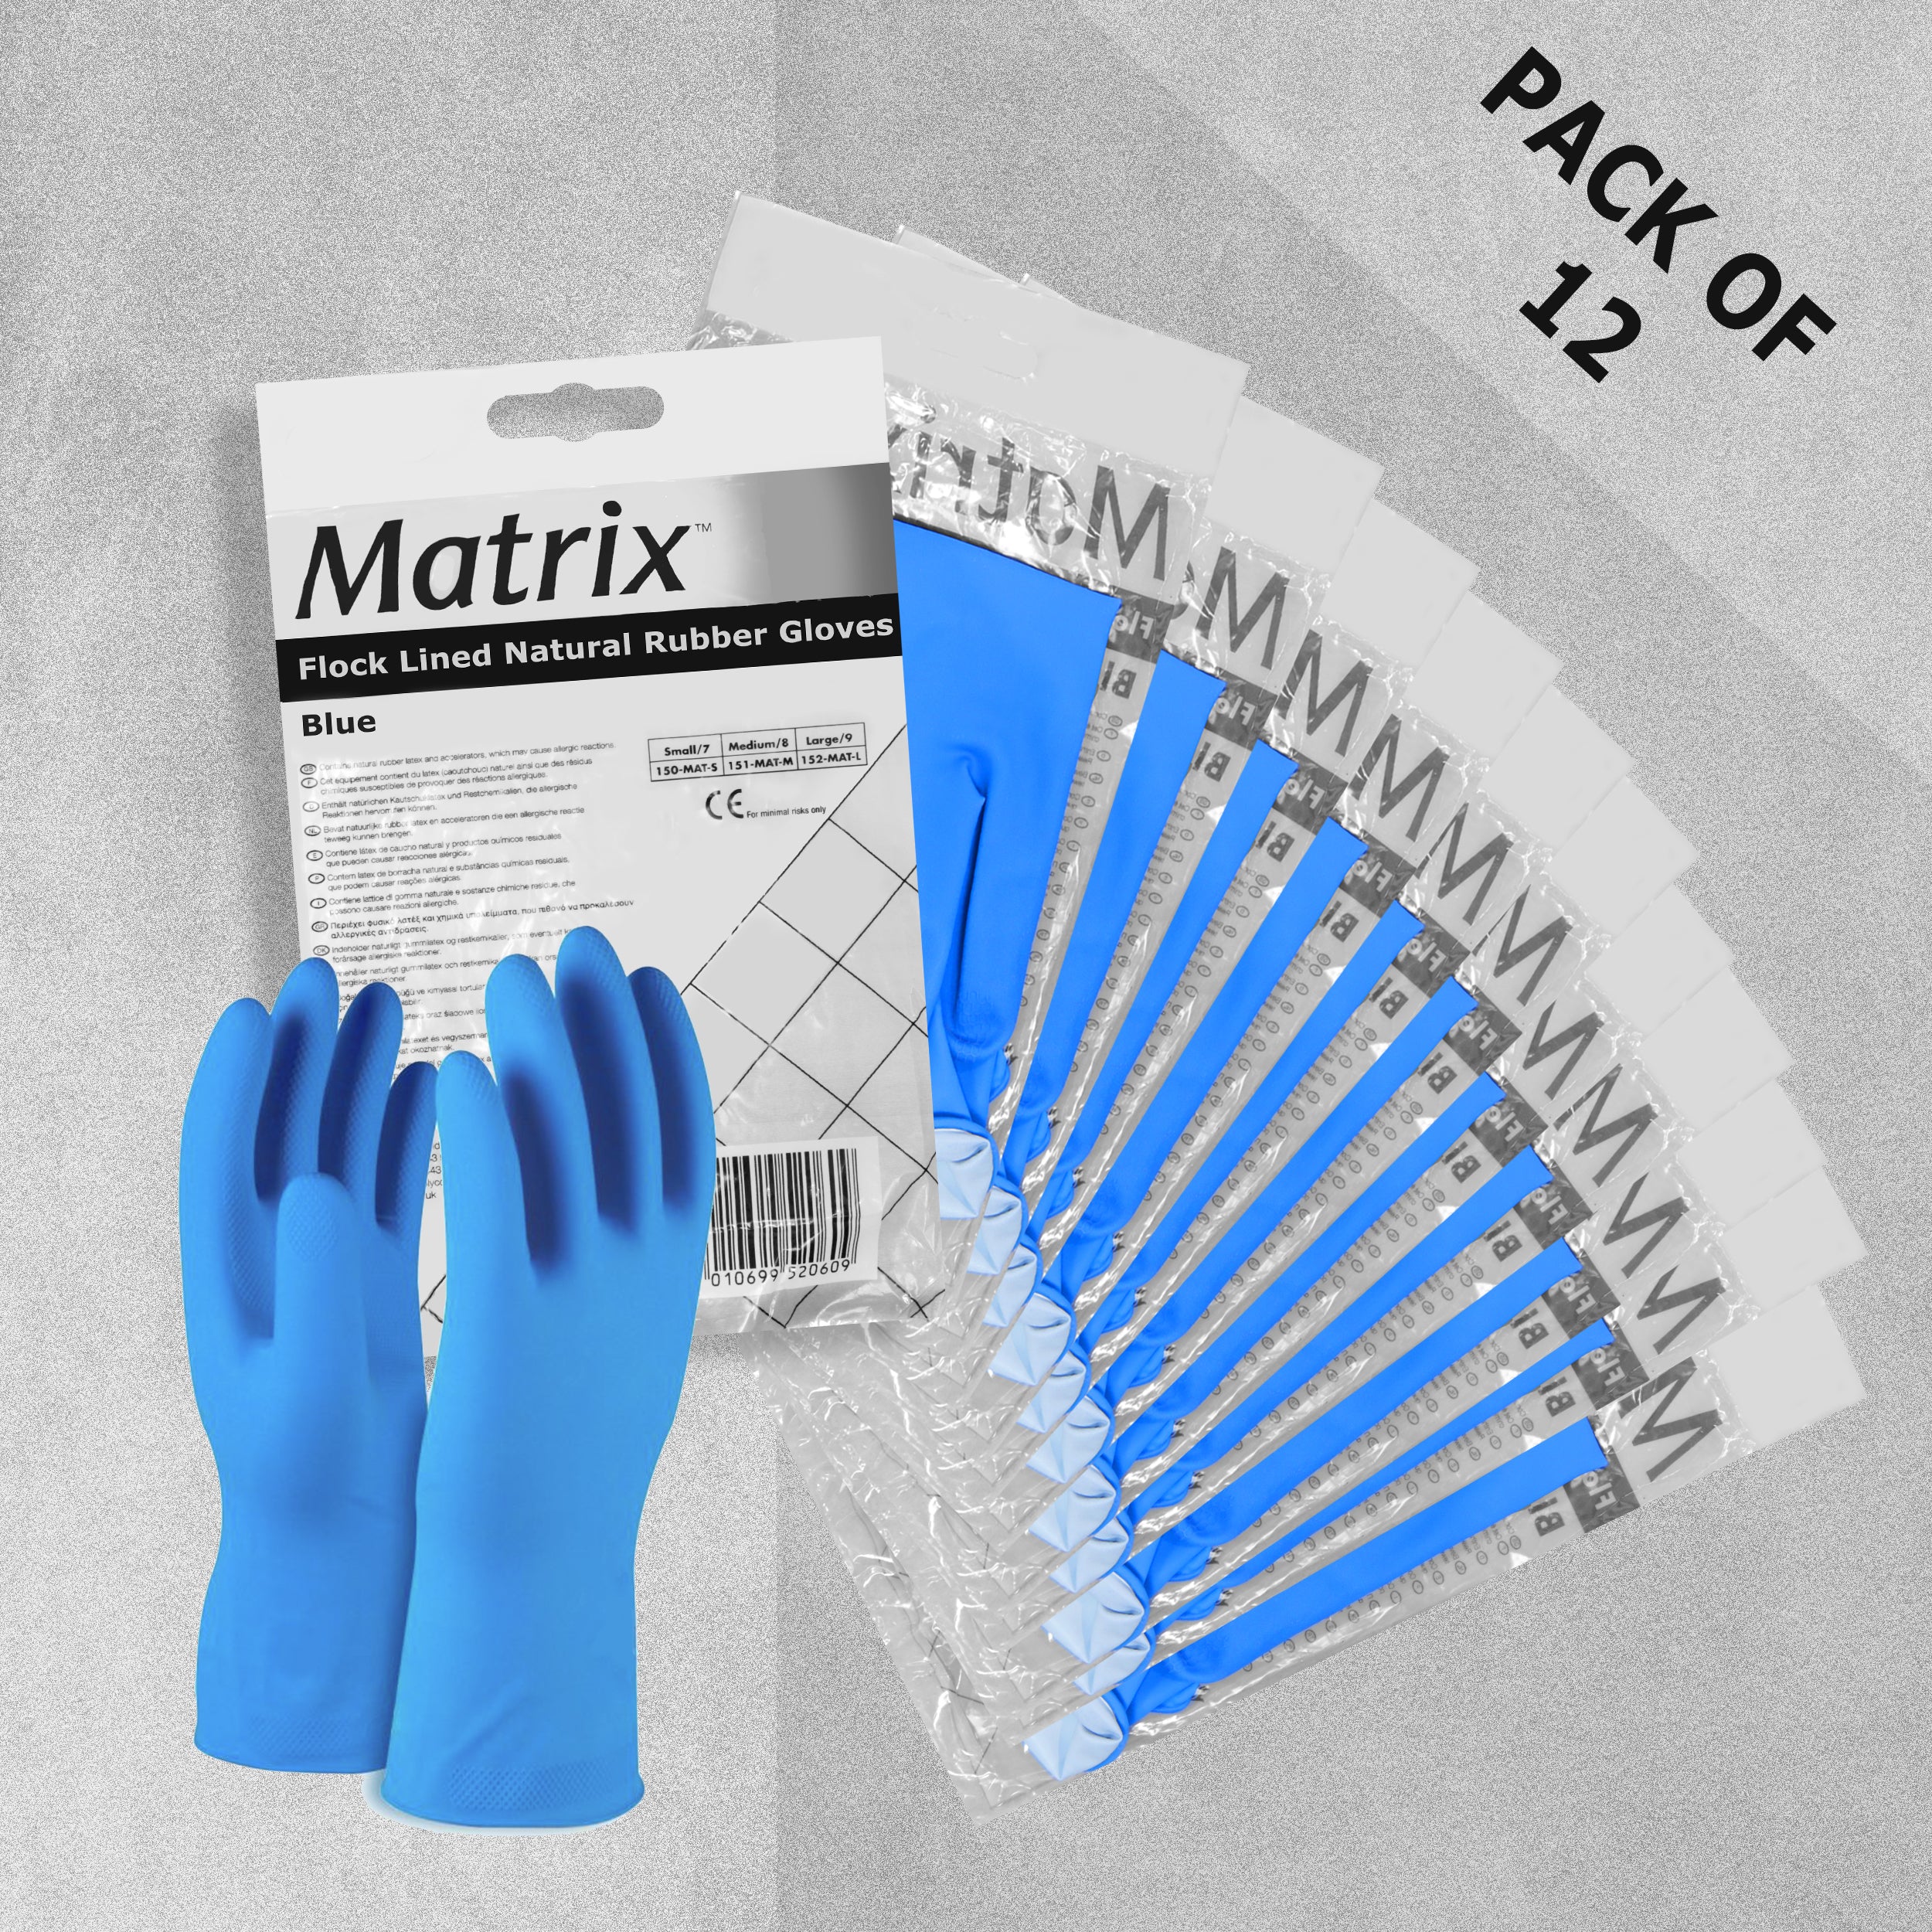 Matrix Flock Lined Natural Rubber Household Gloves Blue Large Size 9 - Pack of 12 Pairs